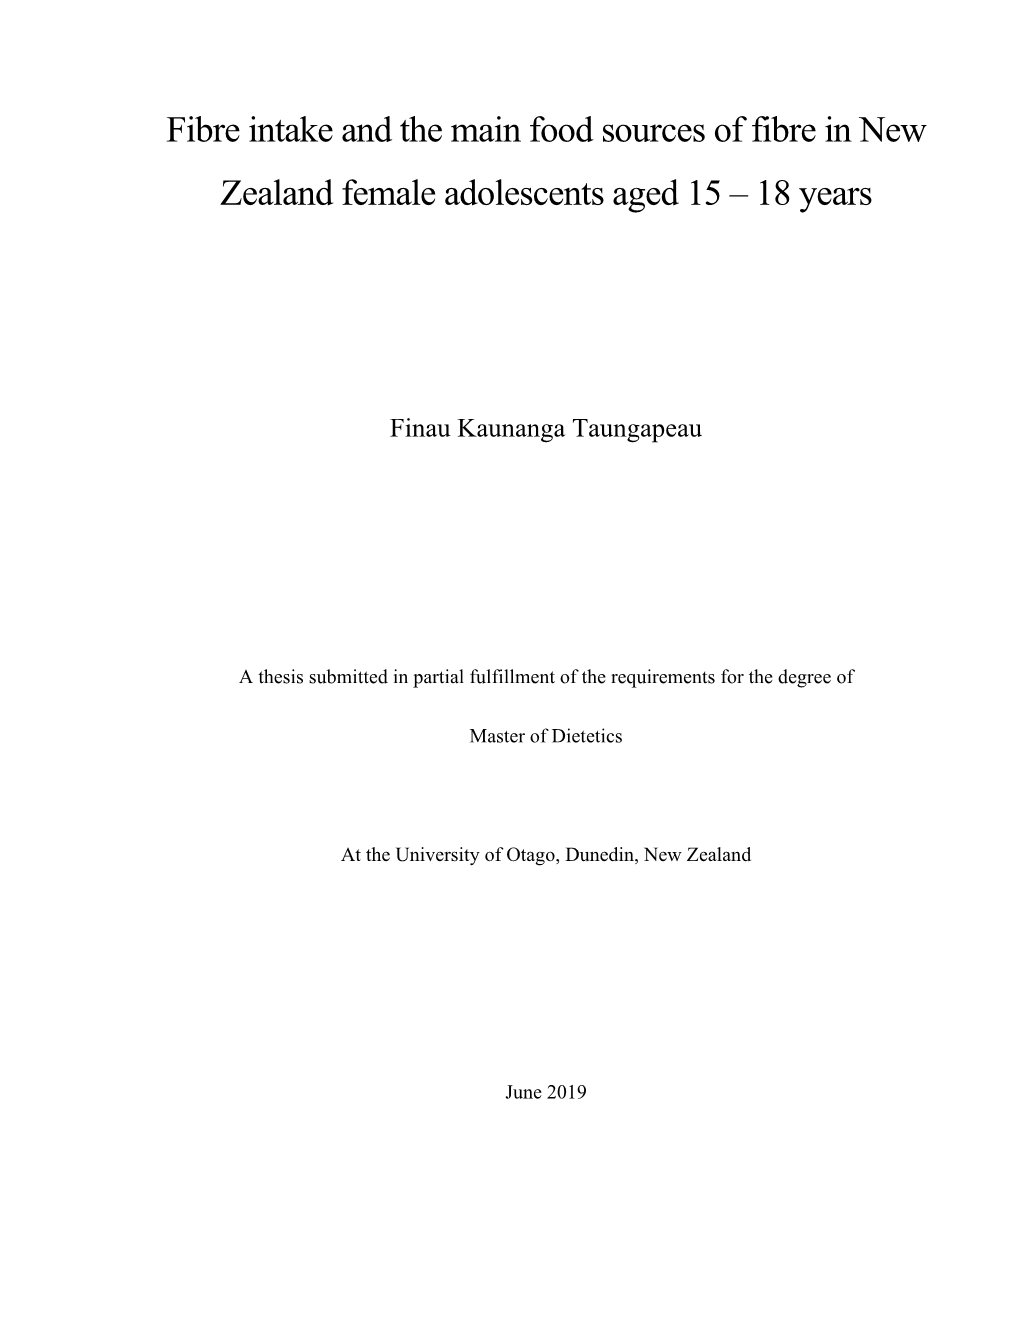 Fibre Intake and the Main Food Sources of Fibre in New Zealand Female Adolescents Aged 15 – 18 Years